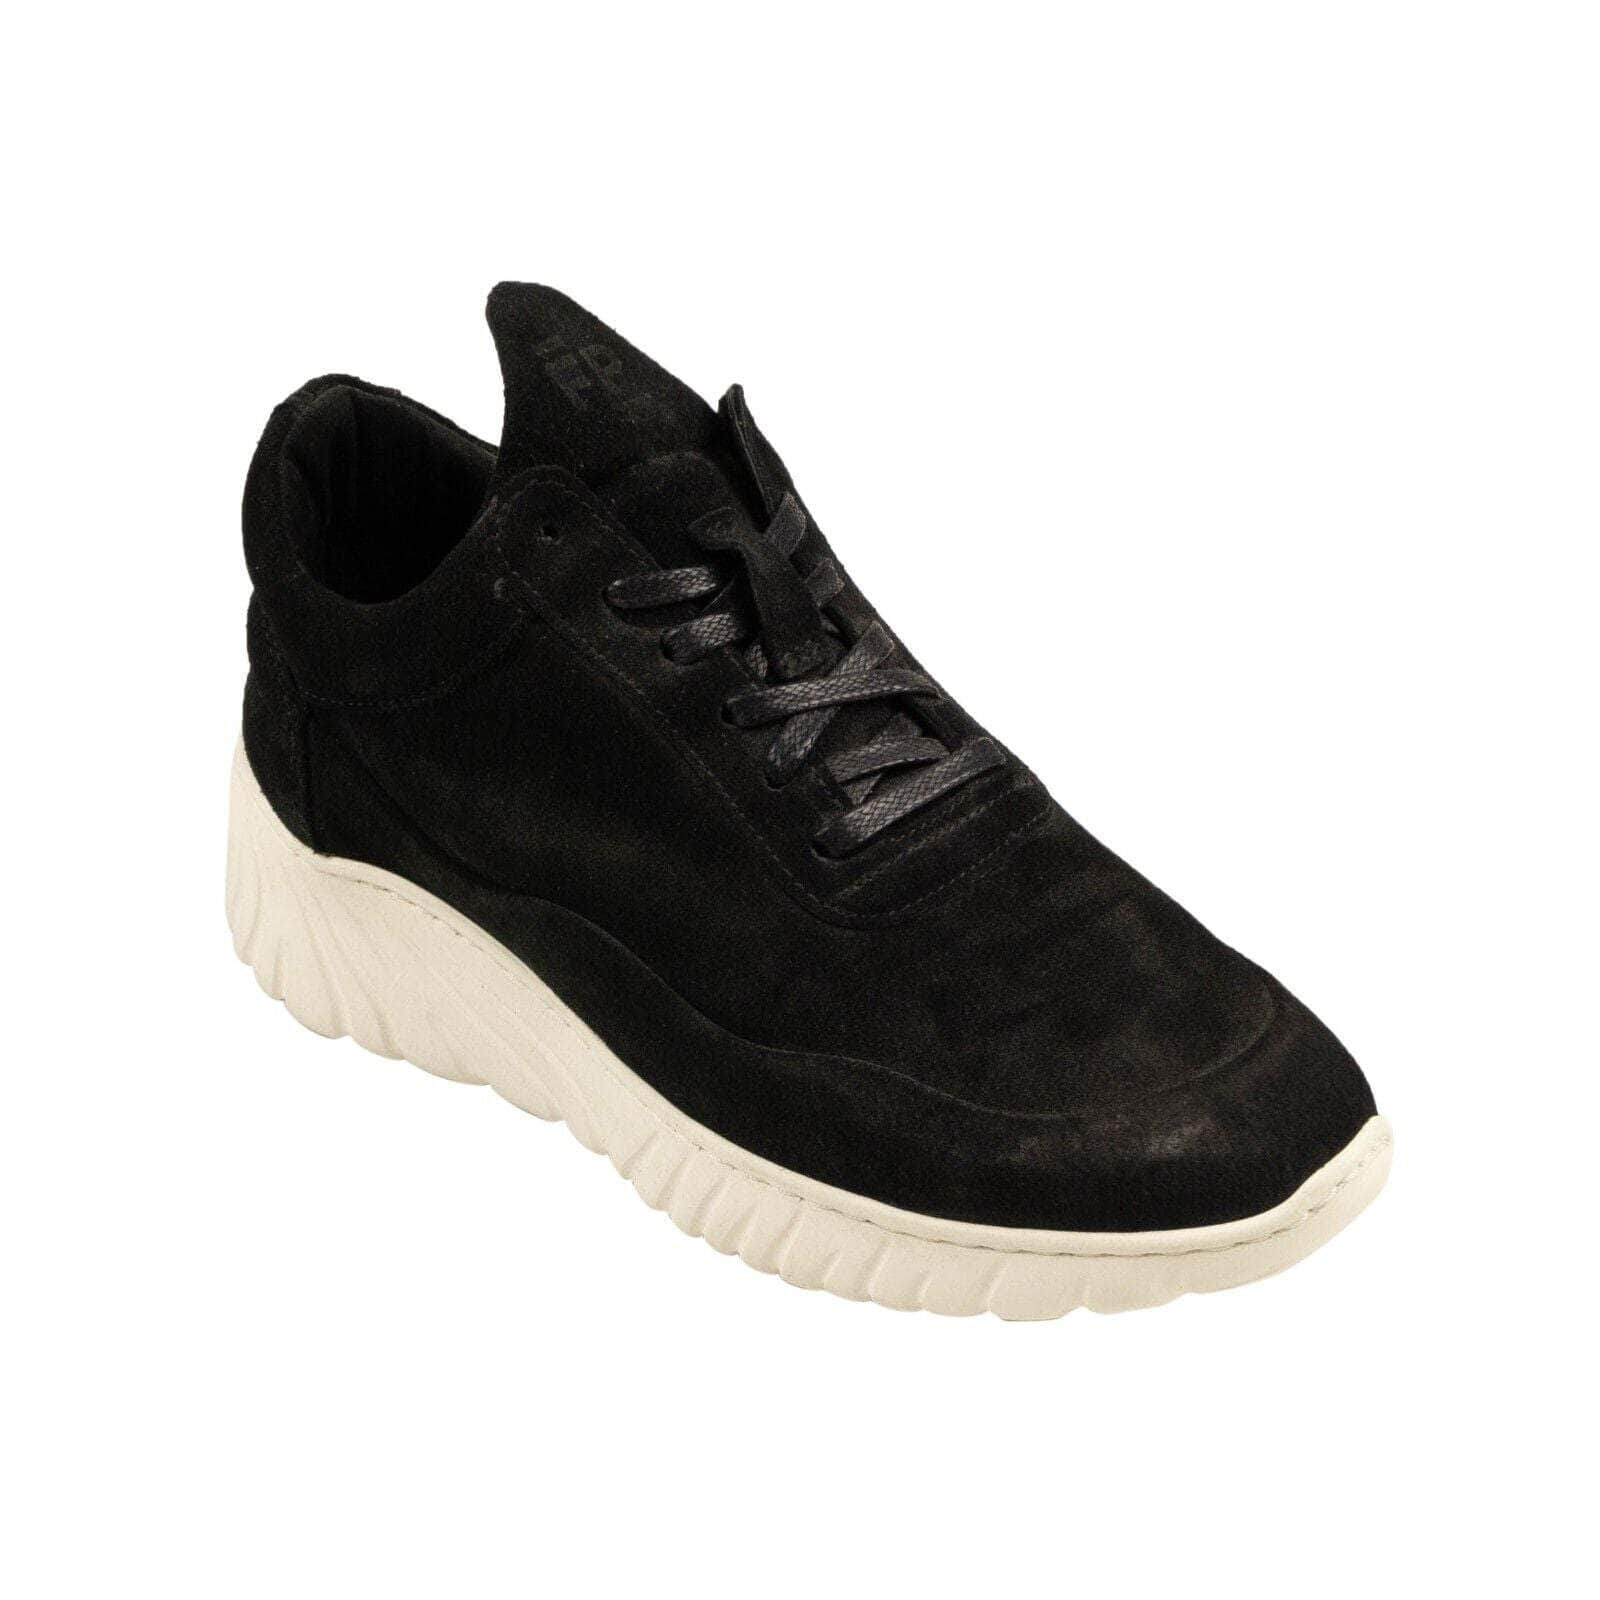 Filling Pieces channelenable-all, chicmi, couponcollection, filling-pieces, gender-mens, main-shoes, mens-shoes, size-38, under-250 38 Black Suede Roots Runner Sneakers 95-FLP-2004/38 95-FLP-2004/38